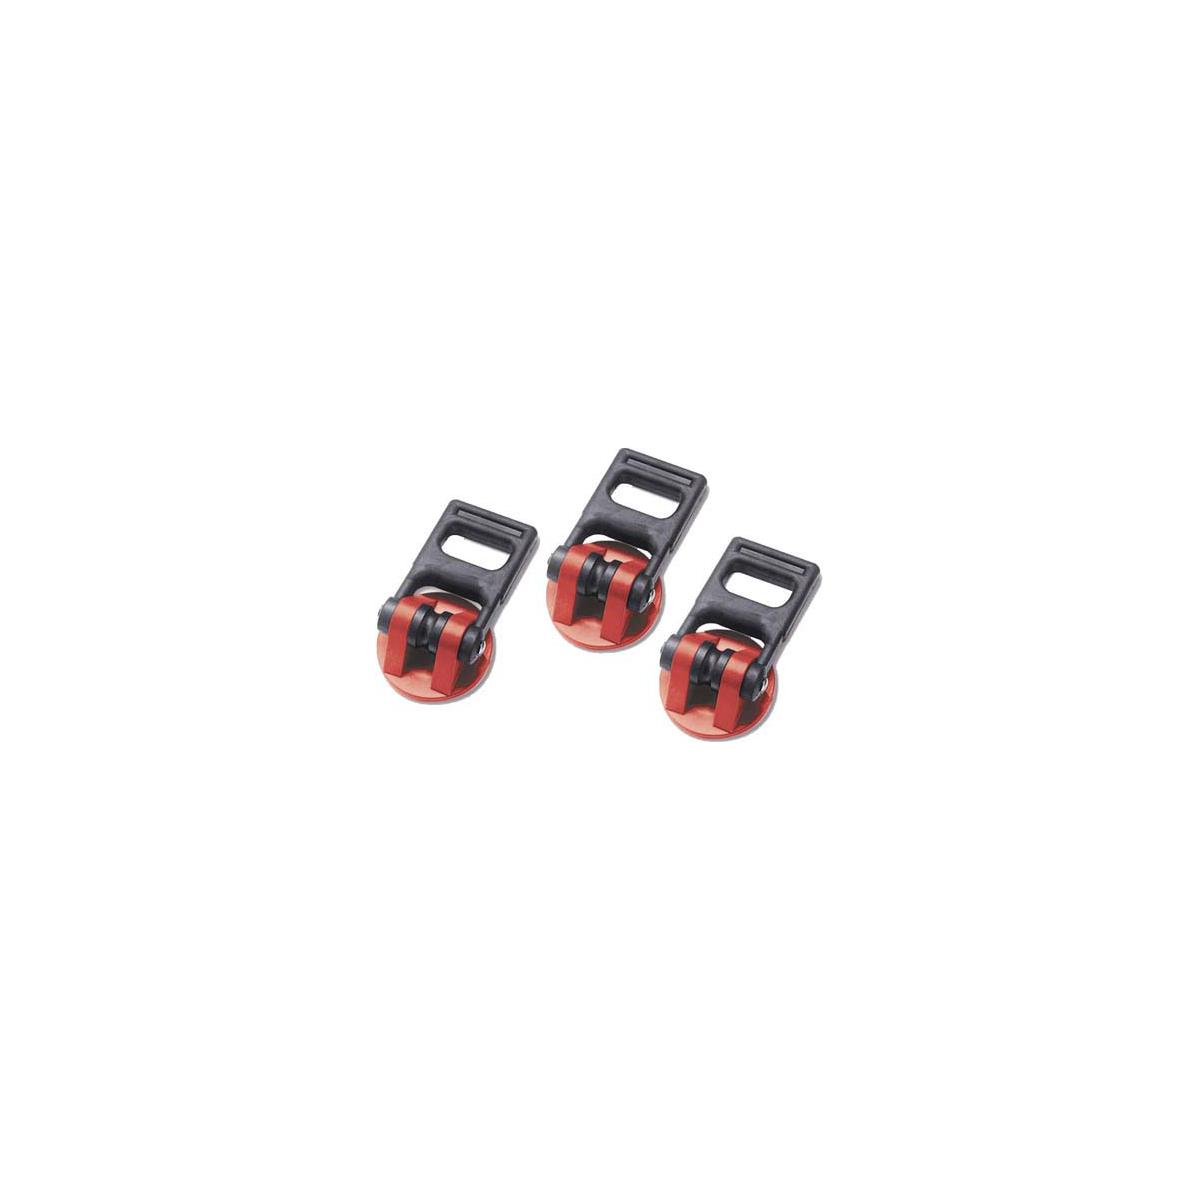 Image of Sachtler Rubber Feet with Locking Device for Tripods